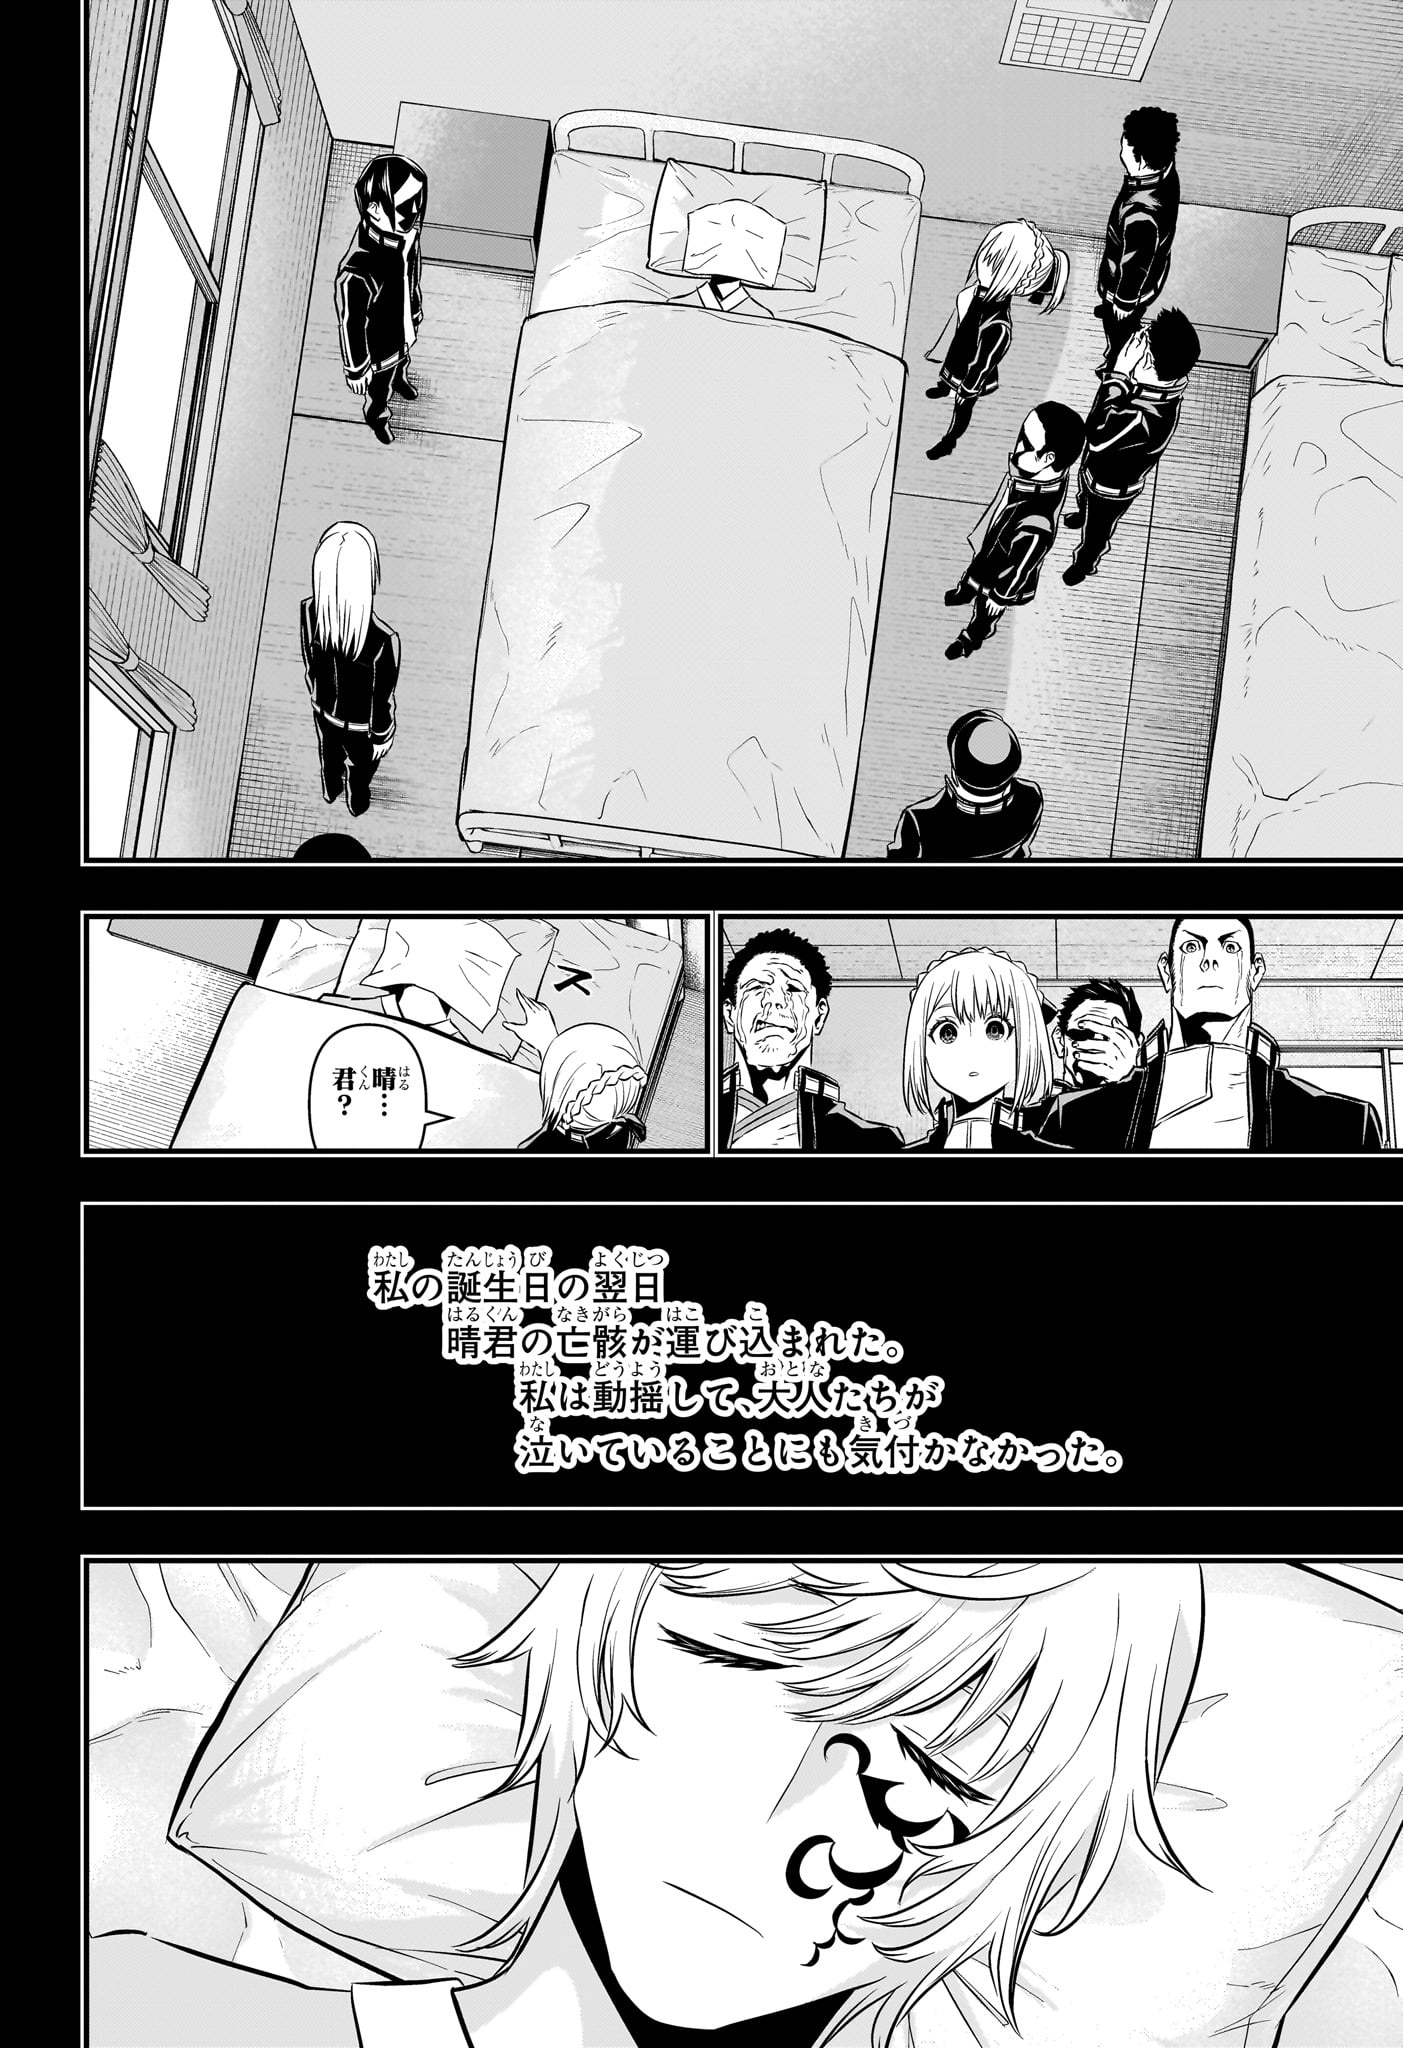 Nue no Onmyouji - Chapter 51 - Page 8